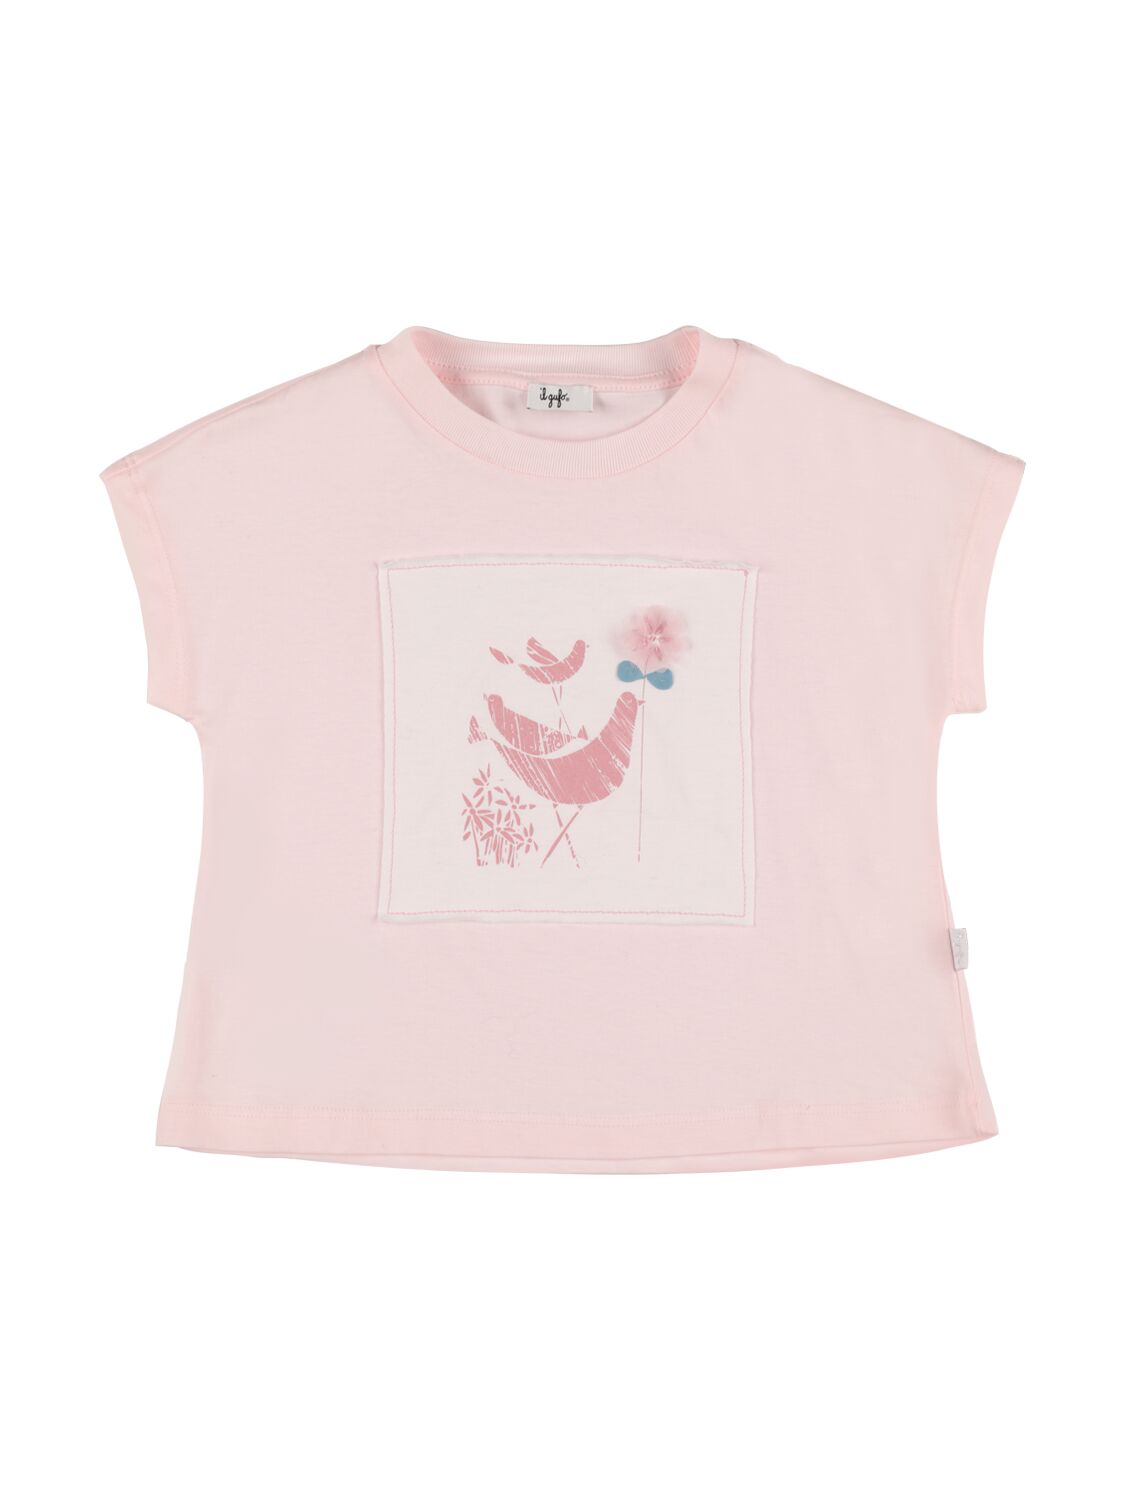 Il Gufo Kids' Embroidered Cotton Jersey T-shirt In Pink,white